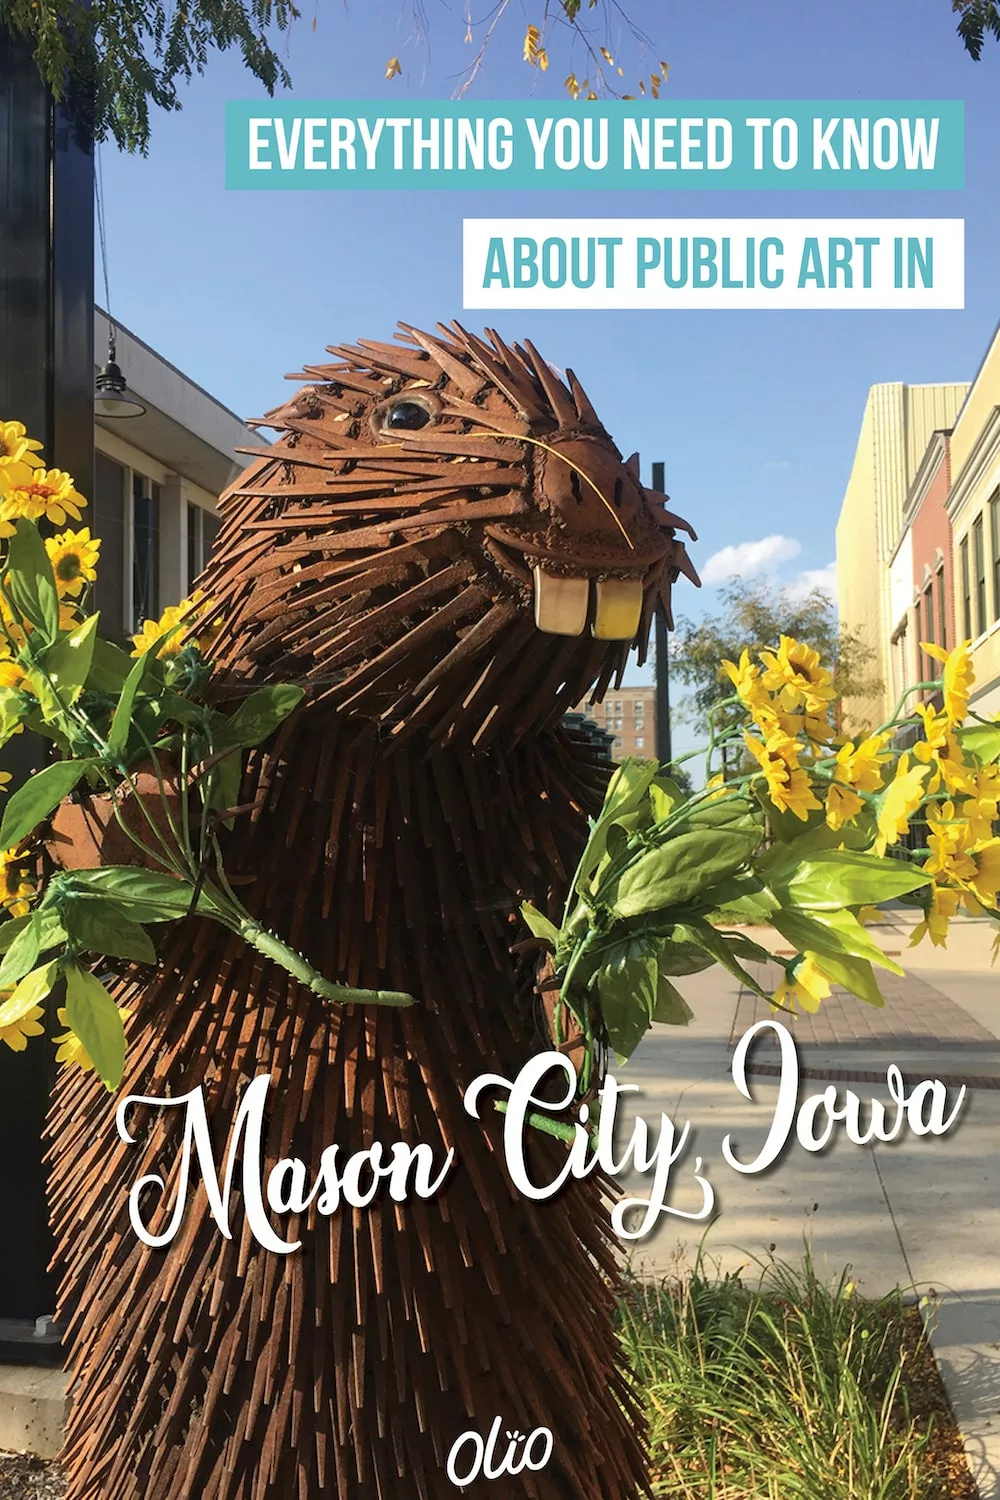 There are so many ways to experience art in Mason City, Iowa! From a renowned museum and expansive sculpture walk to vibrant murals and offbeat folk art, there's something for everyone to see when you travel to this north Iowa community. #Iowa #MasonCity #publicart